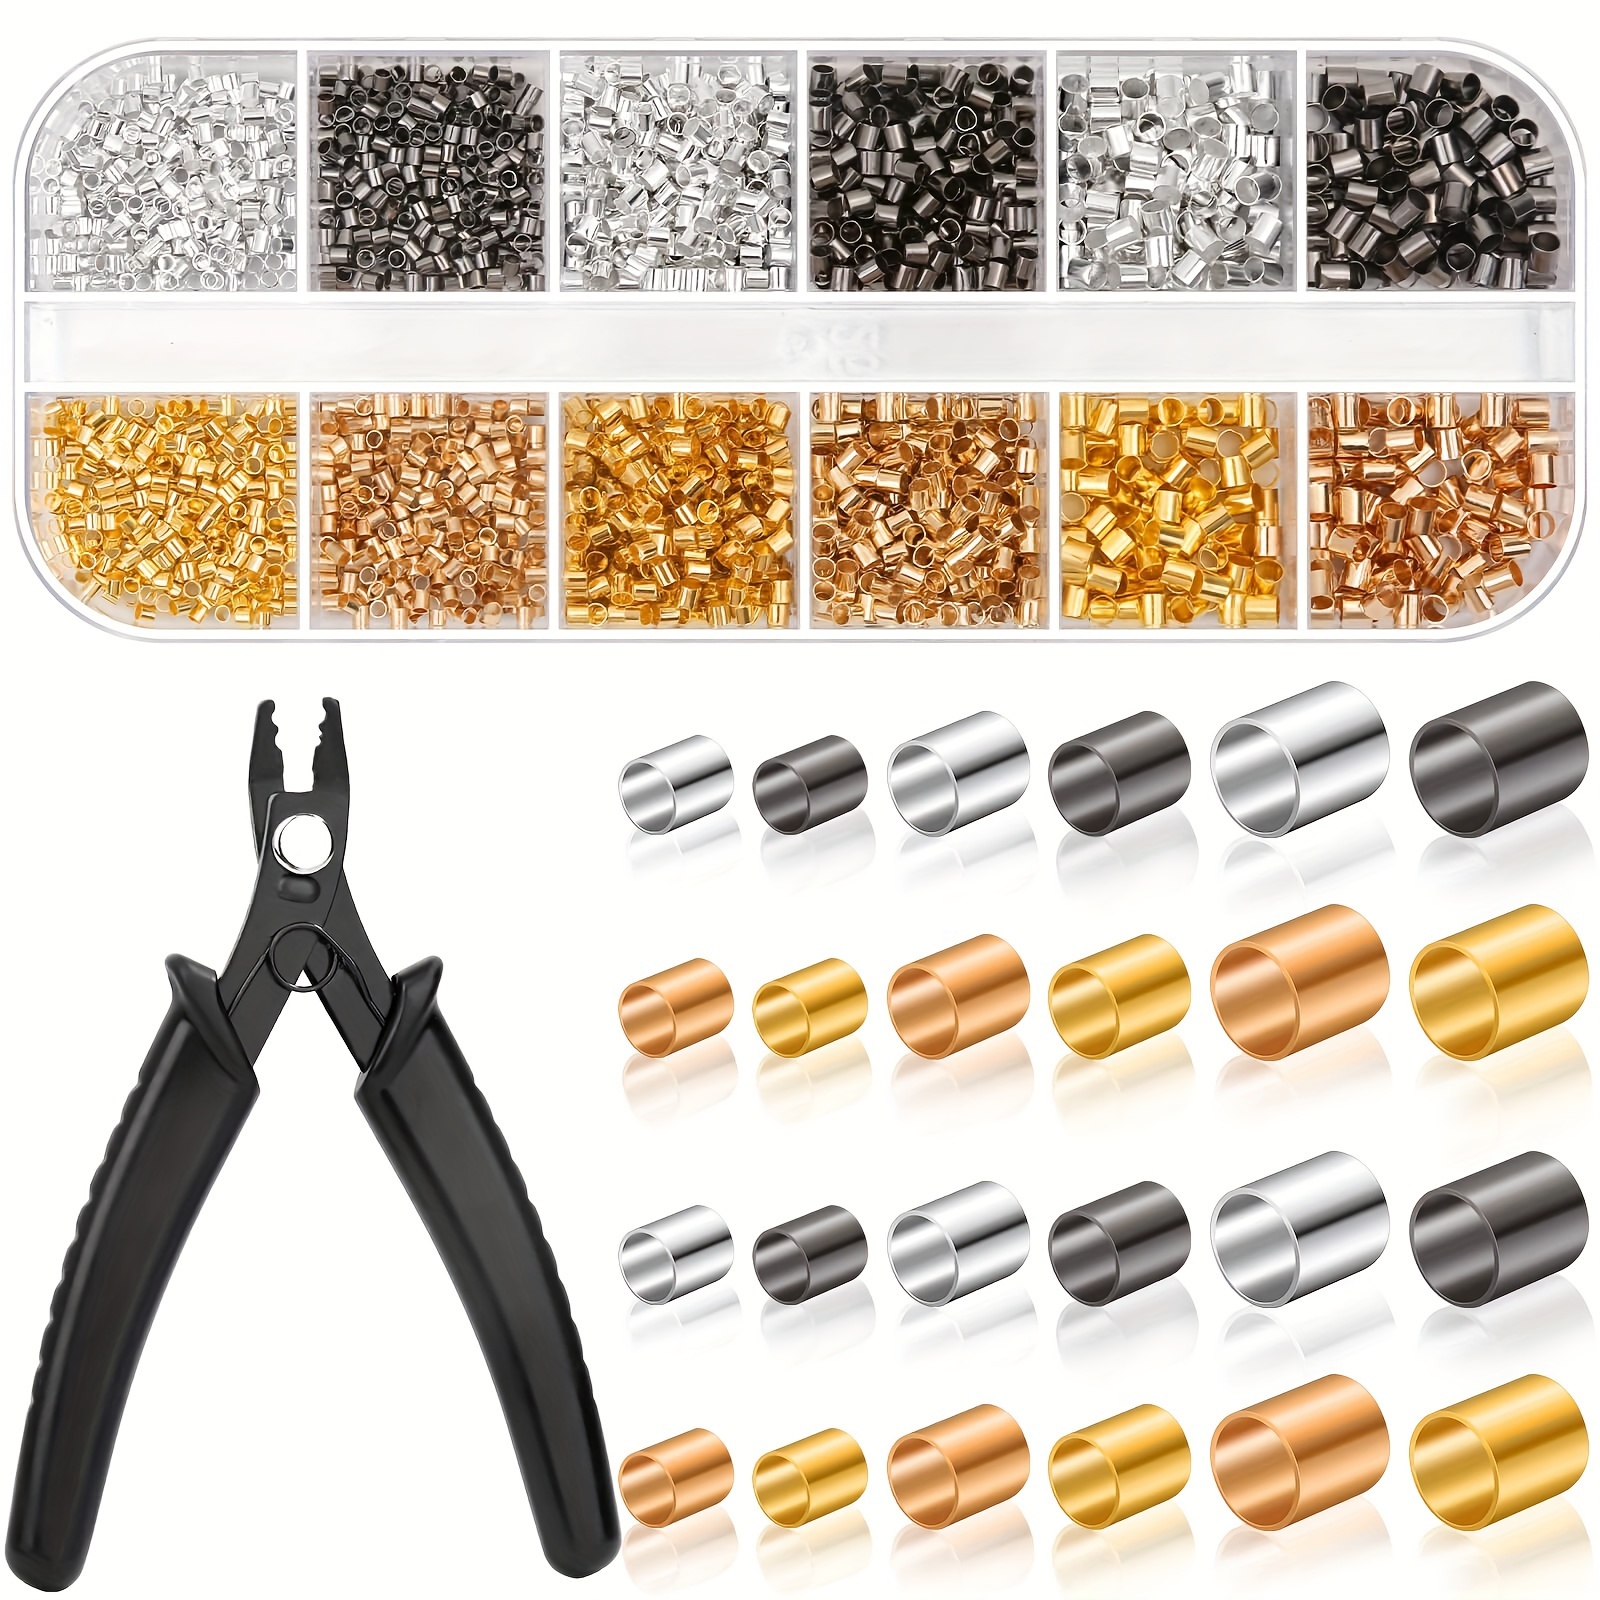 

Crimping Beads For Jewelry Making, 2200pcs Crimp Tubes With Crimping Pliers Crimp Beads For Earring Necklace Bracelet Diy Jewelry Making (3 Sizes, 4 Colors), Golden Diy